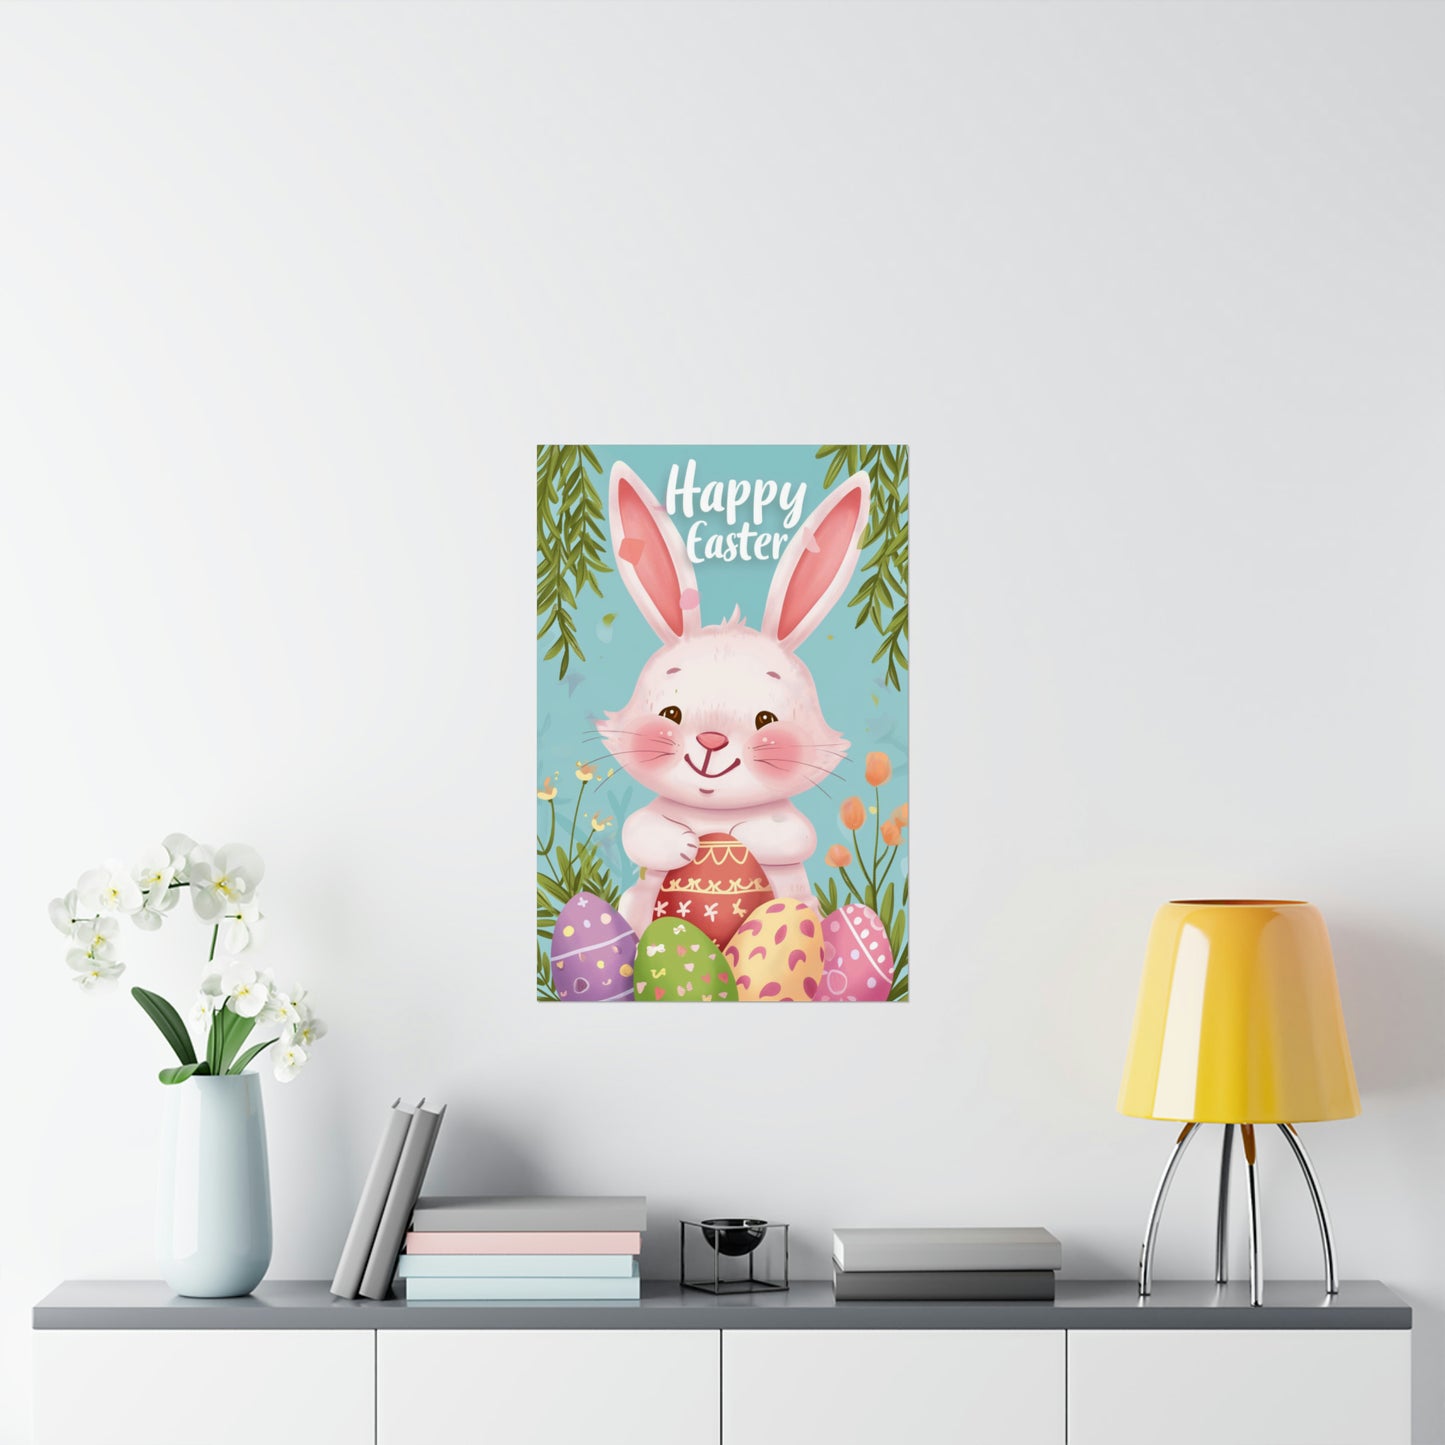 Happy Easter Poster Print, Bunny Eggs Hunt Rabbit Nursery Wall Image Art Vertical Paper Artwork Small Large Cool Room Office Decor